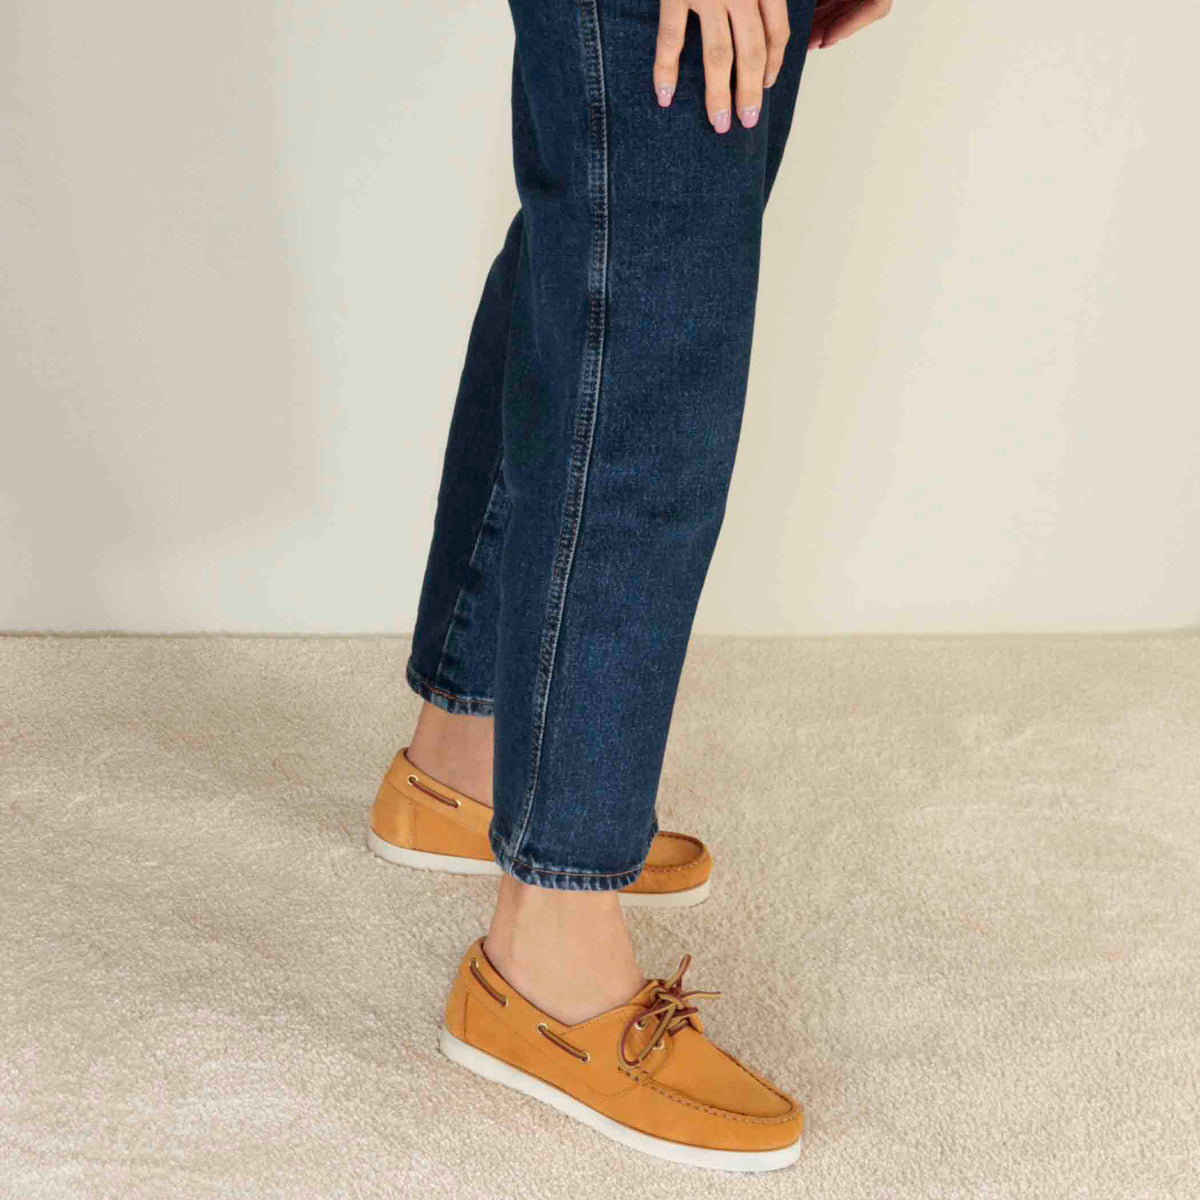 Women's boat moccasin in yellow suede